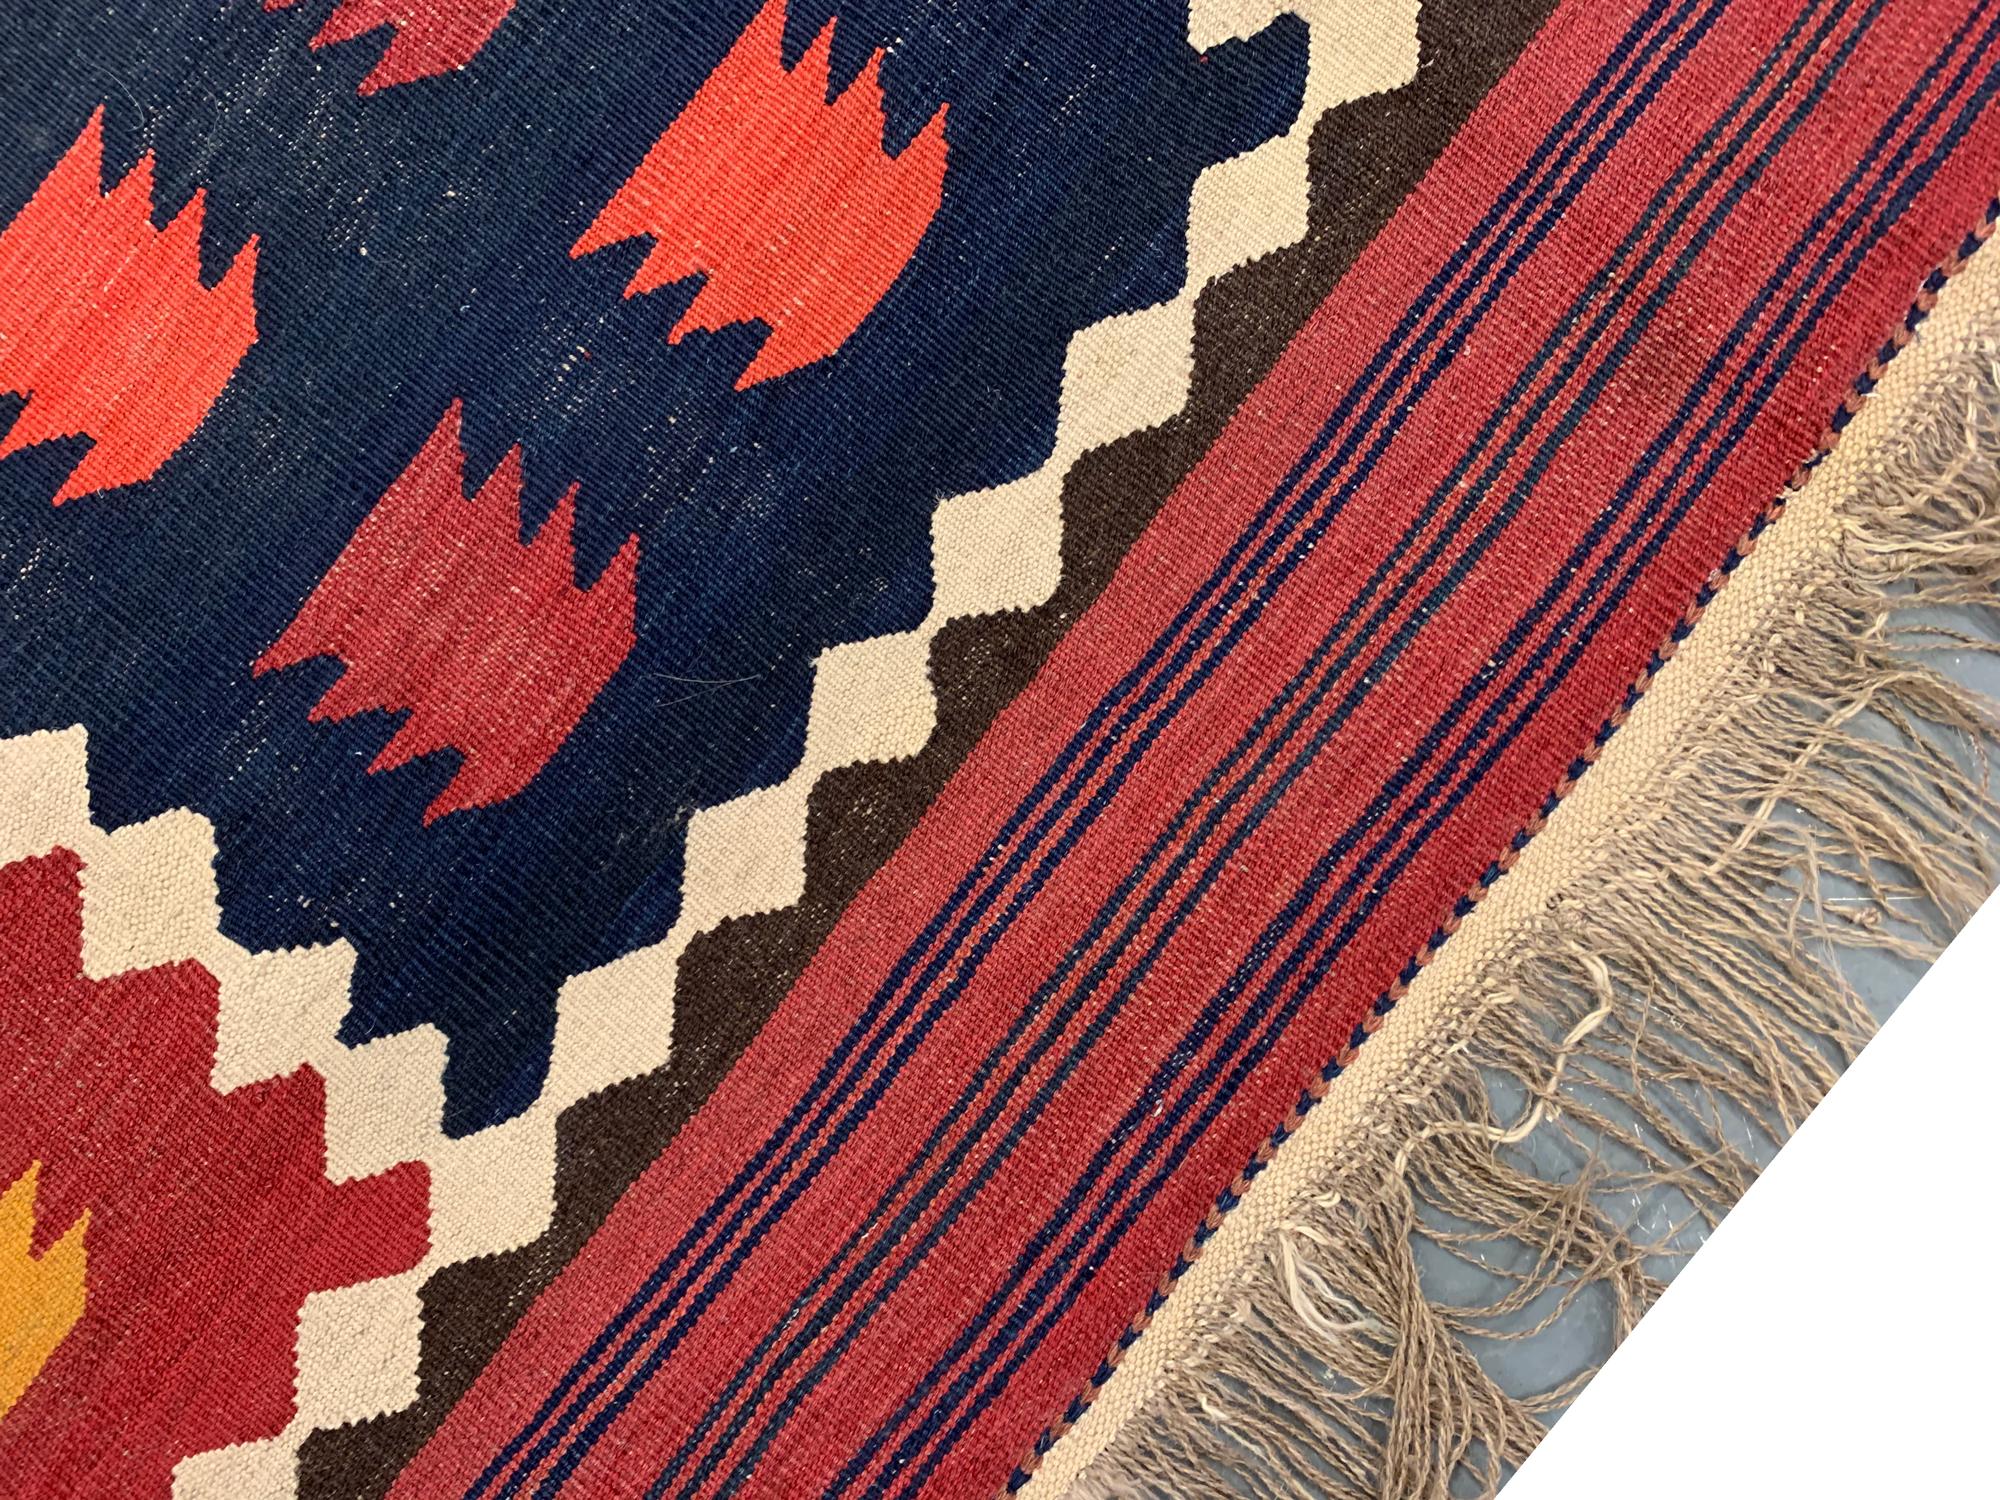 Vegetable Dyed Antique Rugs Red Blue Wool Kilim Area Rug Flat-Woven Tribal Kilim For Sale